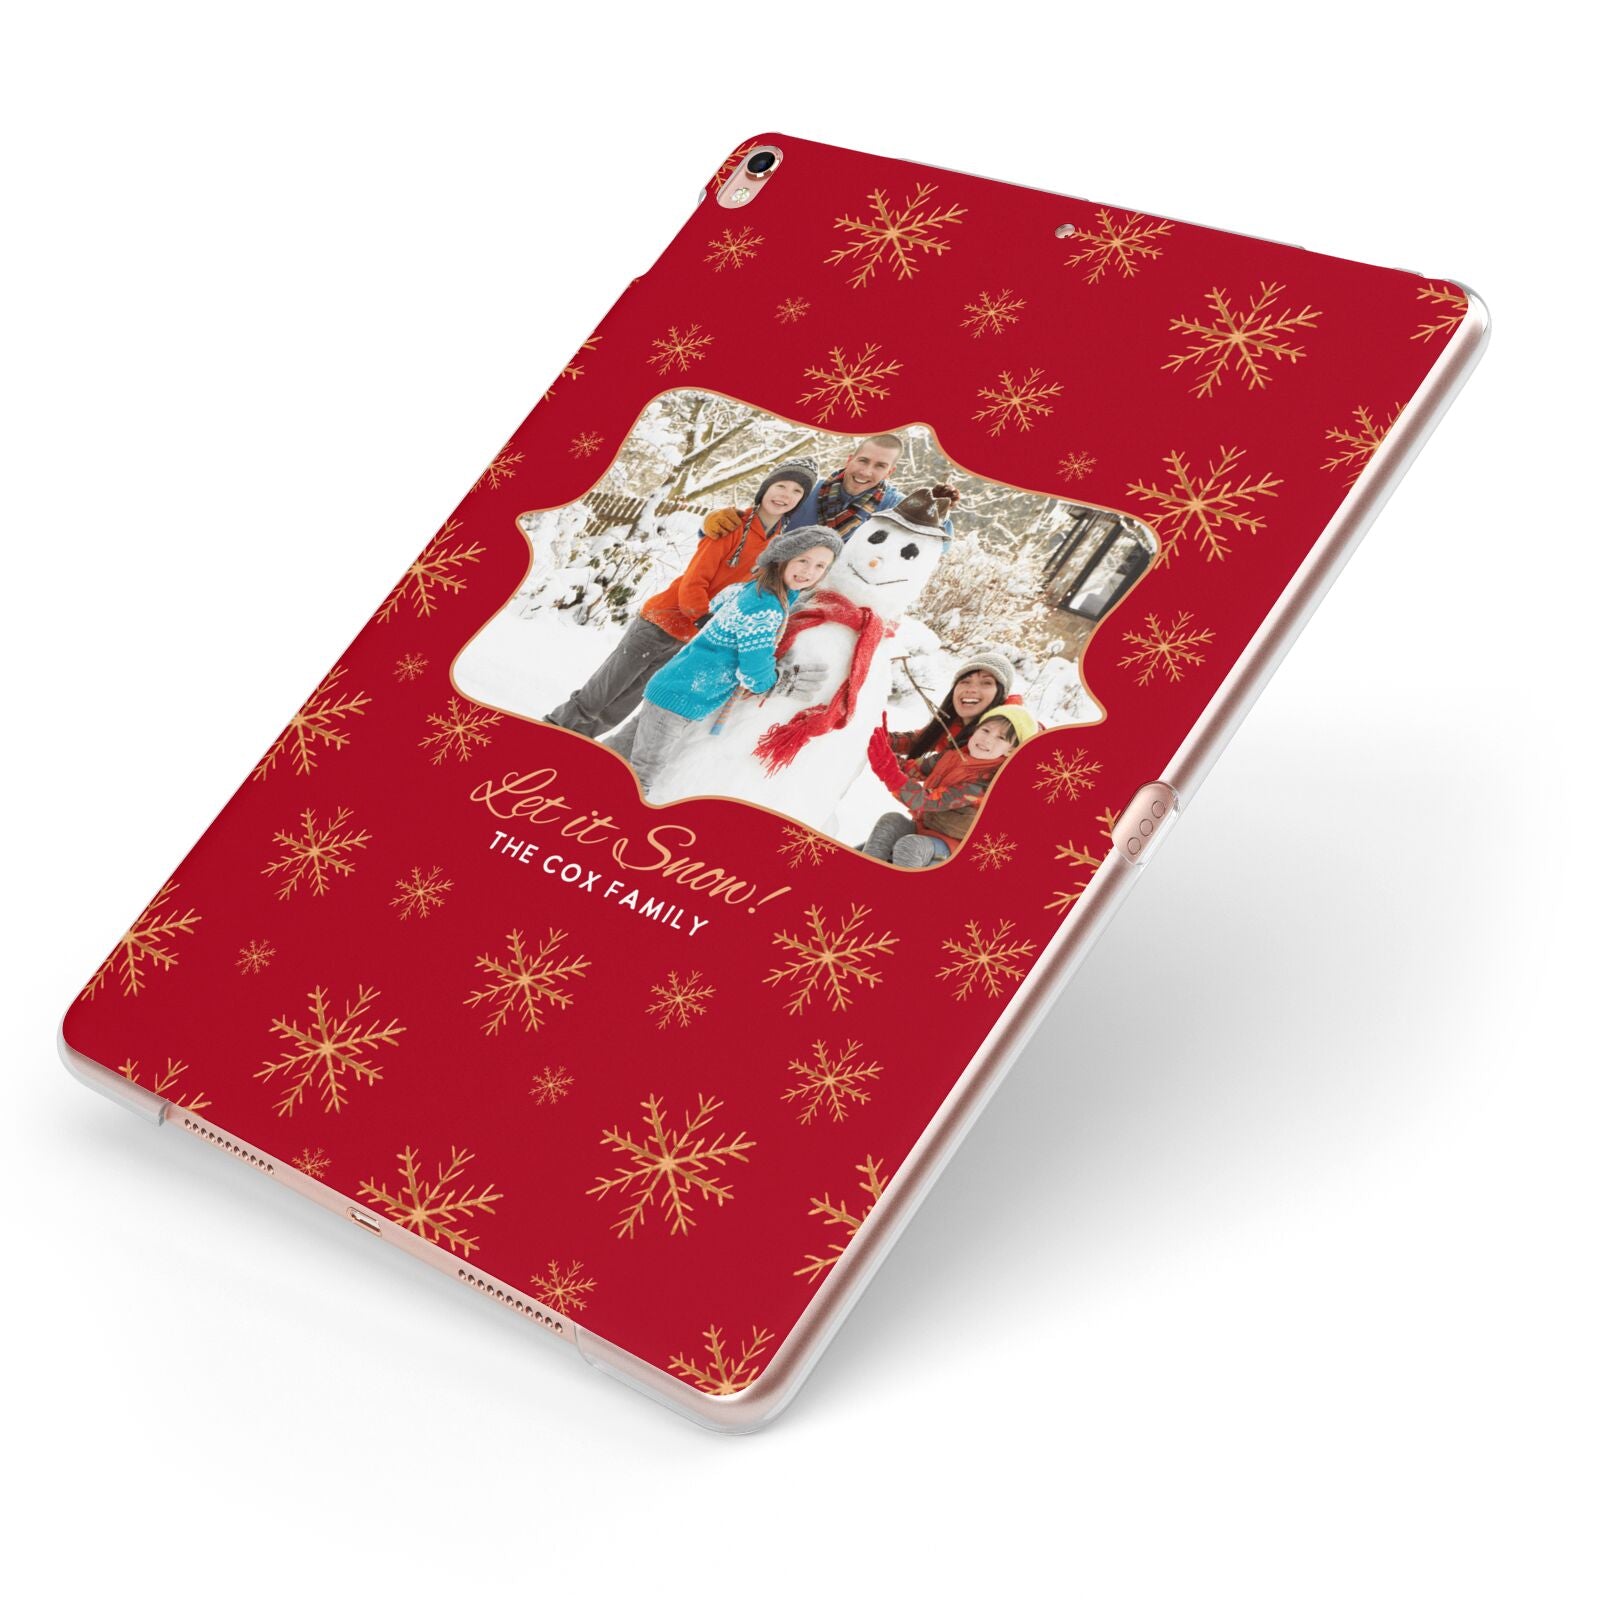 Let it Snow Christmas Photo Upload Apple iPad Case on Rose Gold iPad Side View